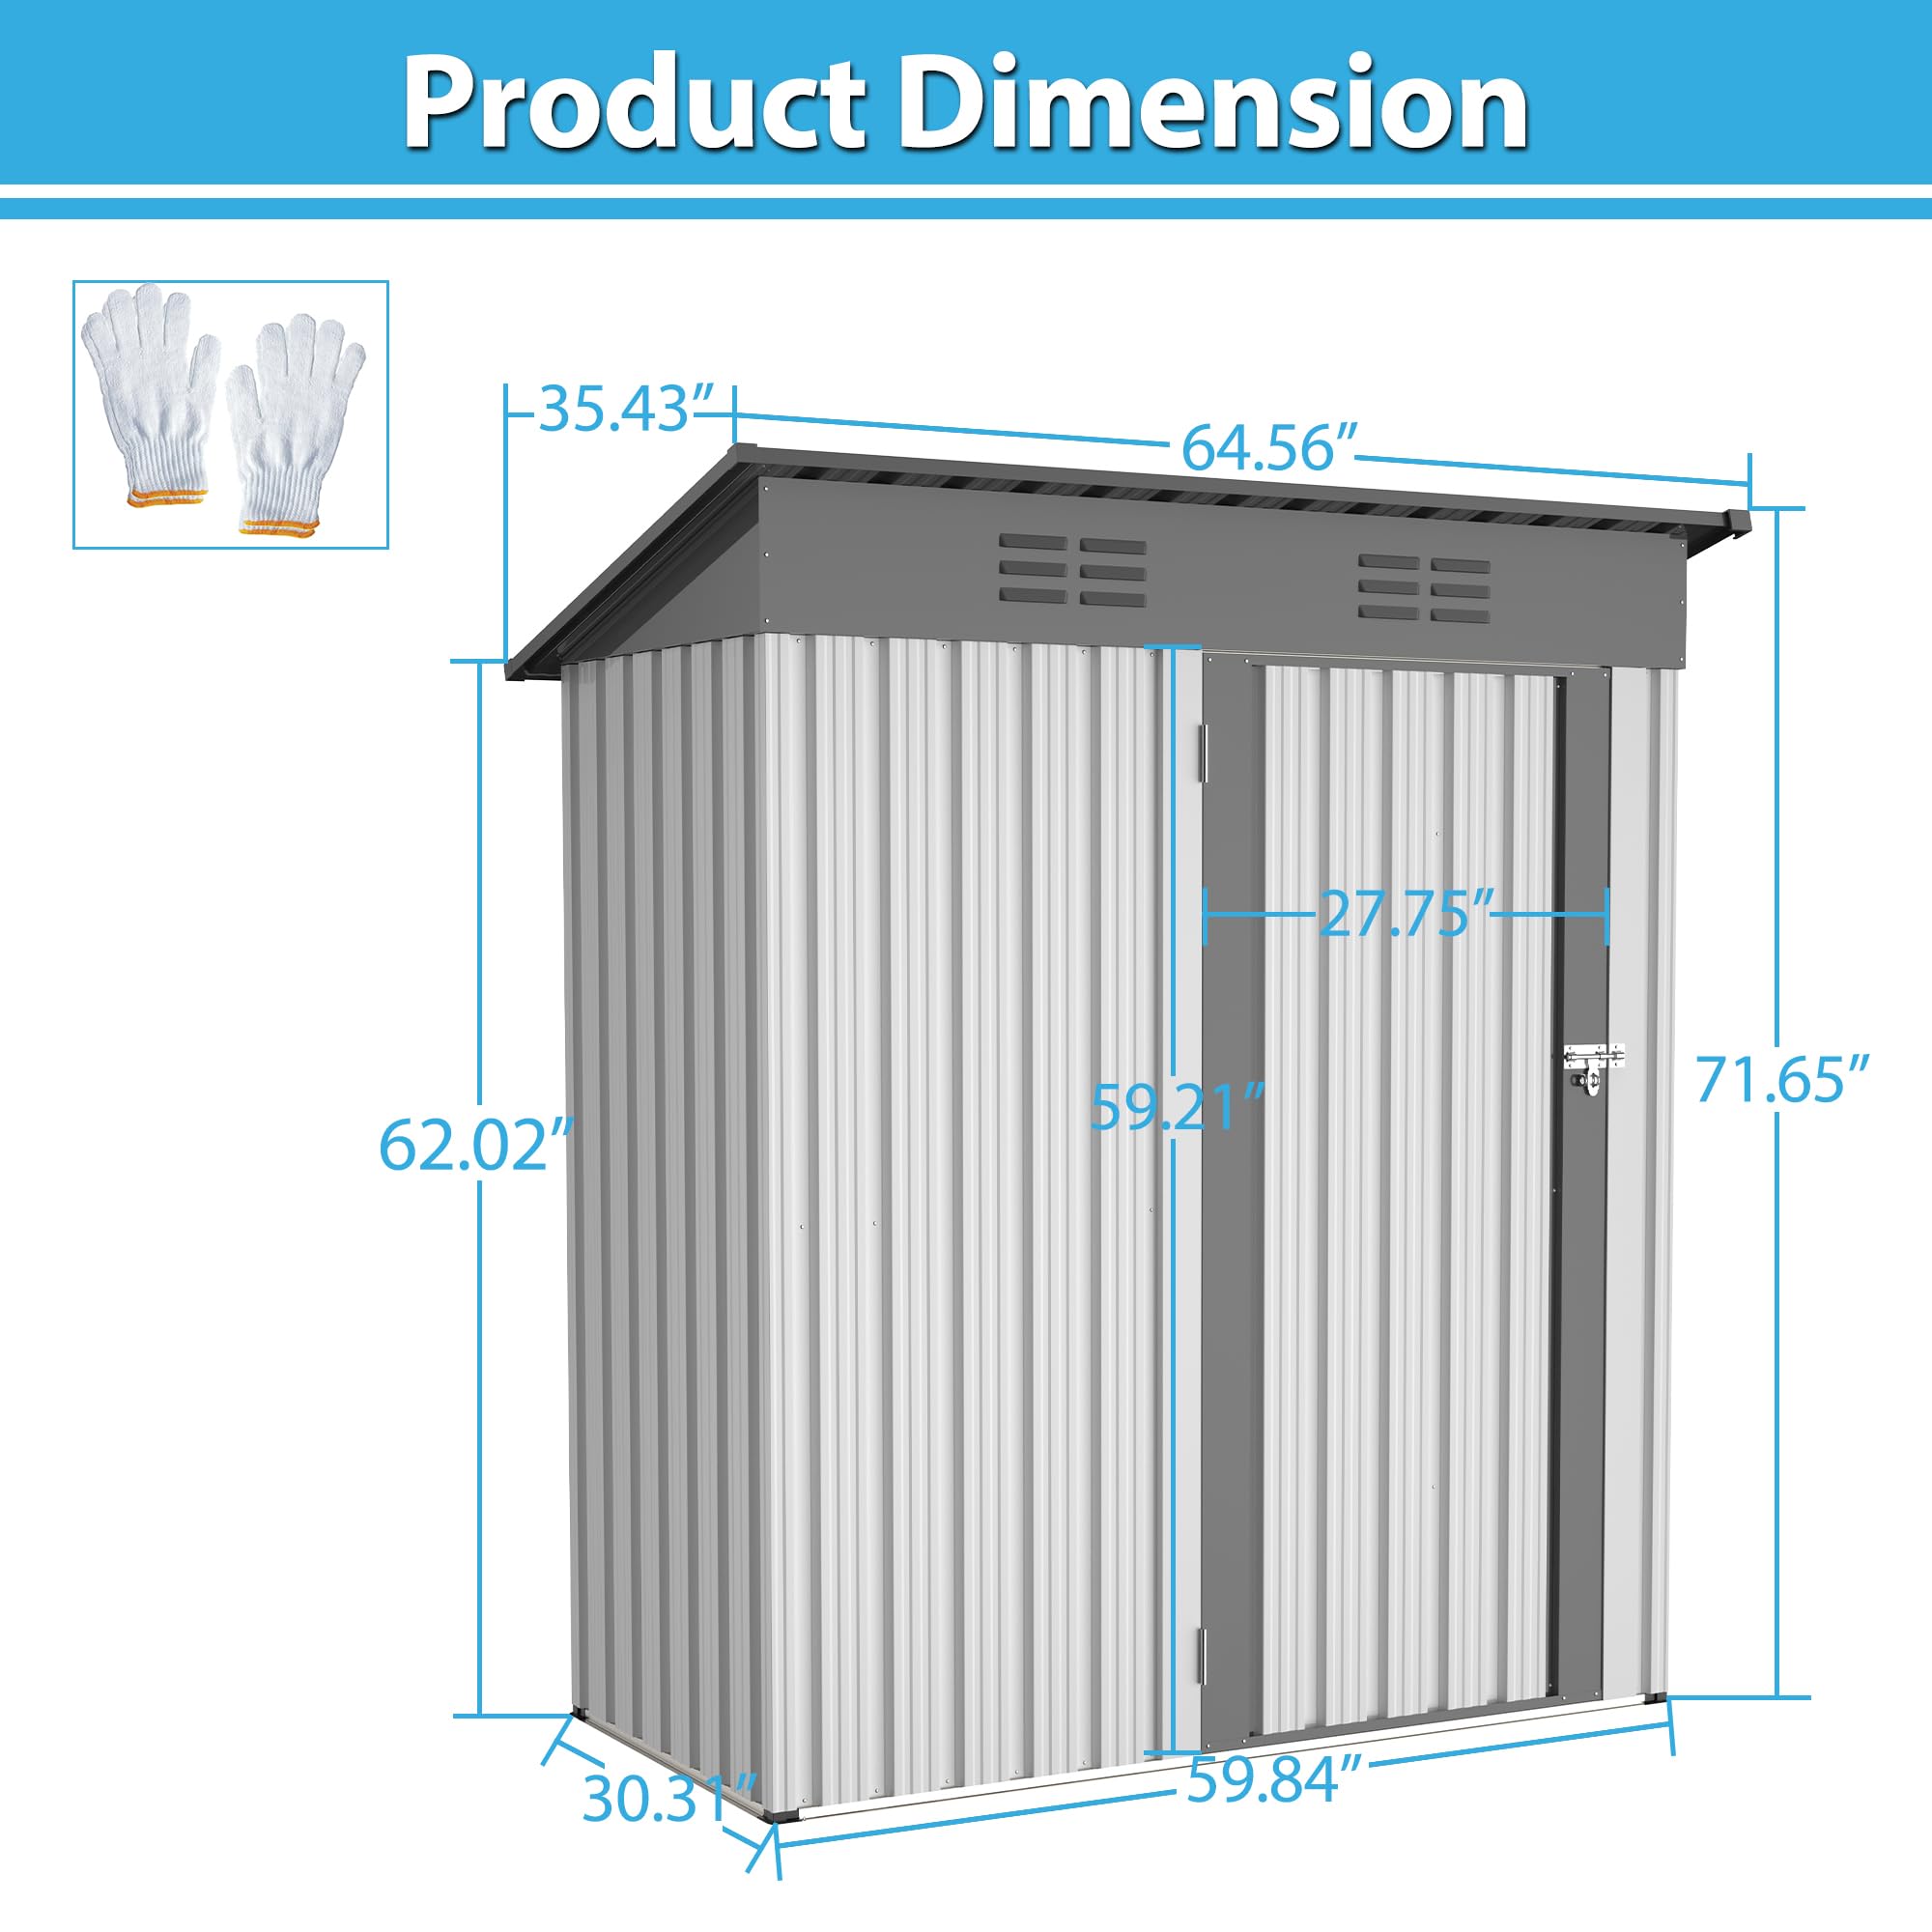 Morhome 5x3 FT Outdoor Storage Shed,Tool Garden Metal Sheds with Lockable Door,Outside Waterproof Galvanized Steel Storage House for Backyard Garden, Patio, Lawn